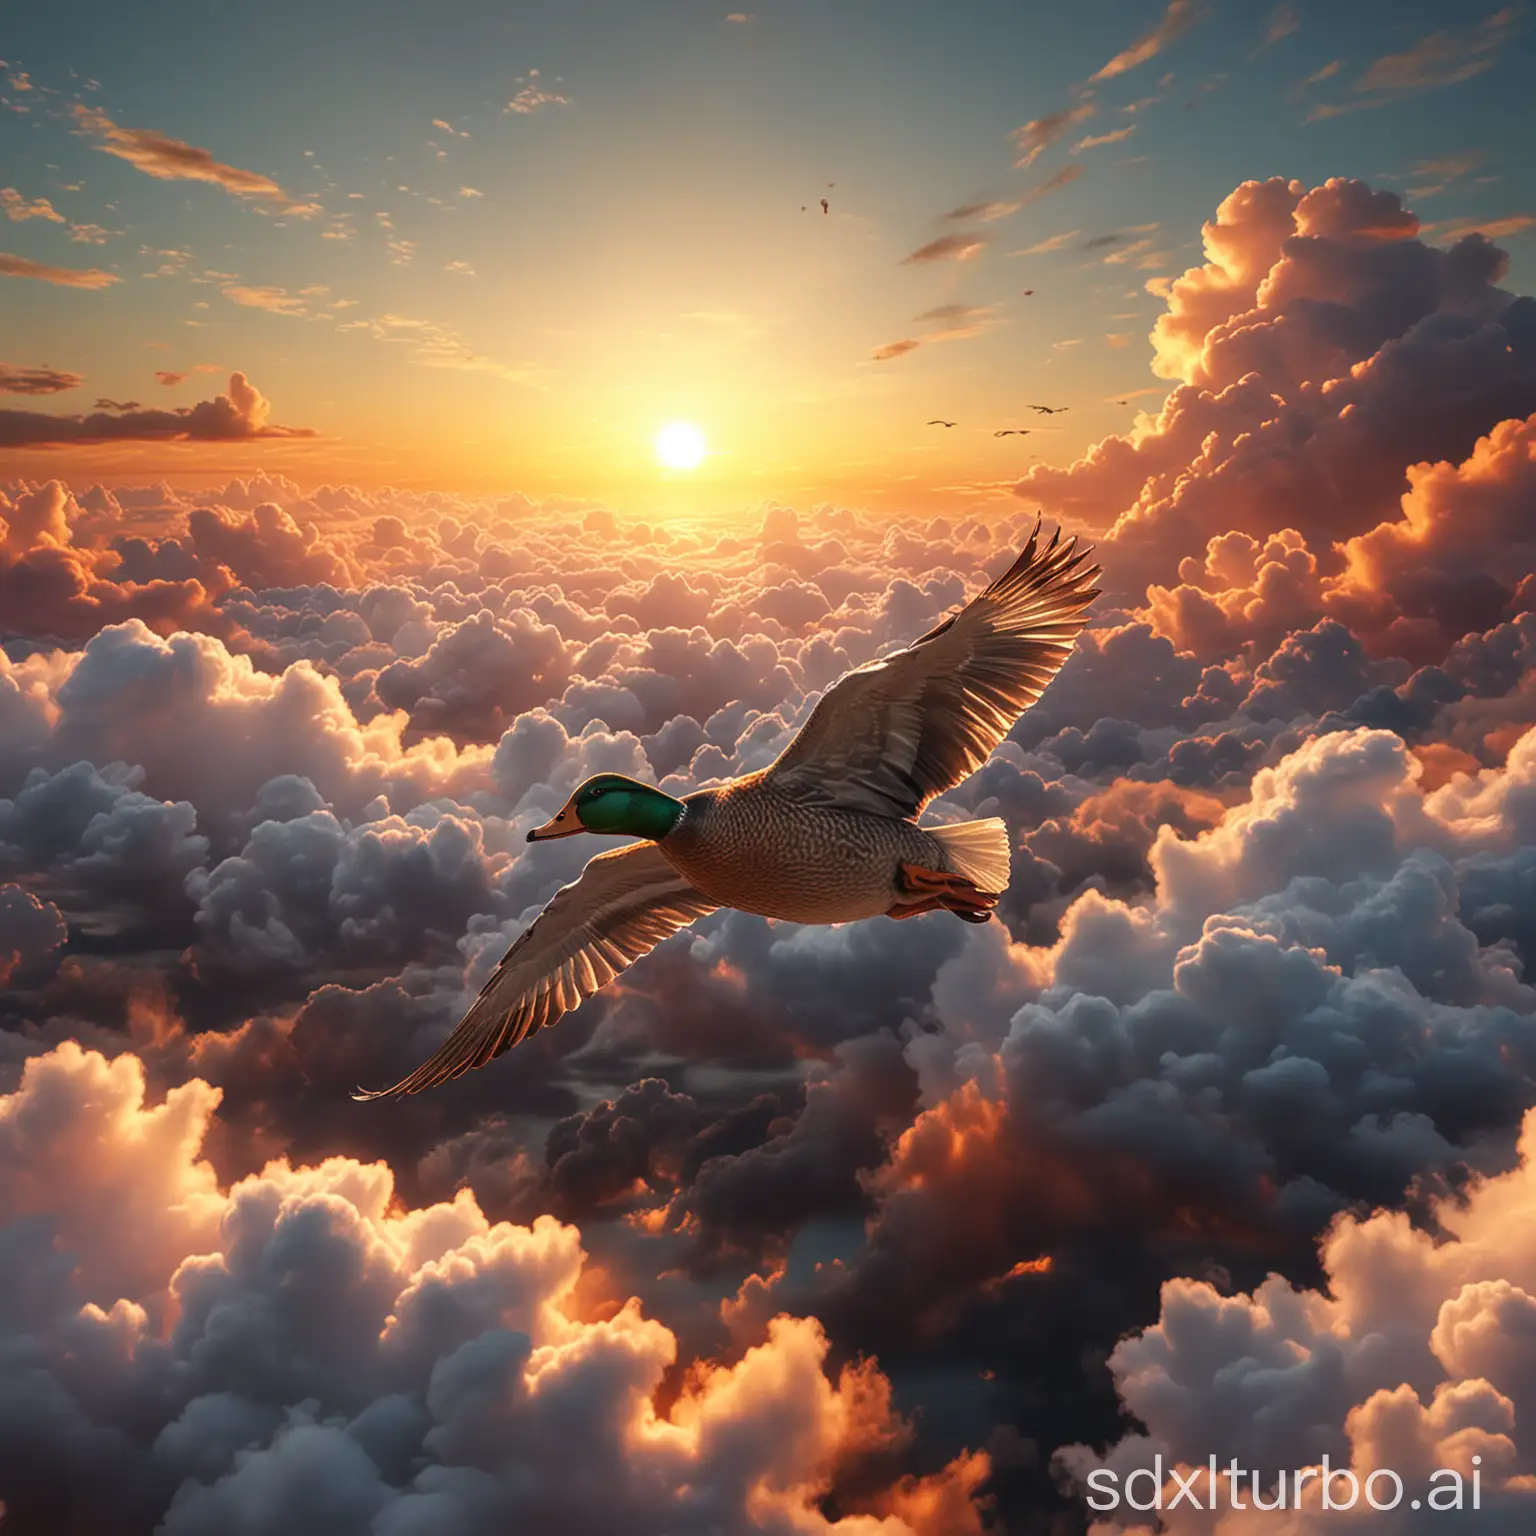 Duck-Gliding-on-Clouds-Towards-Sunset-Realistic-Image